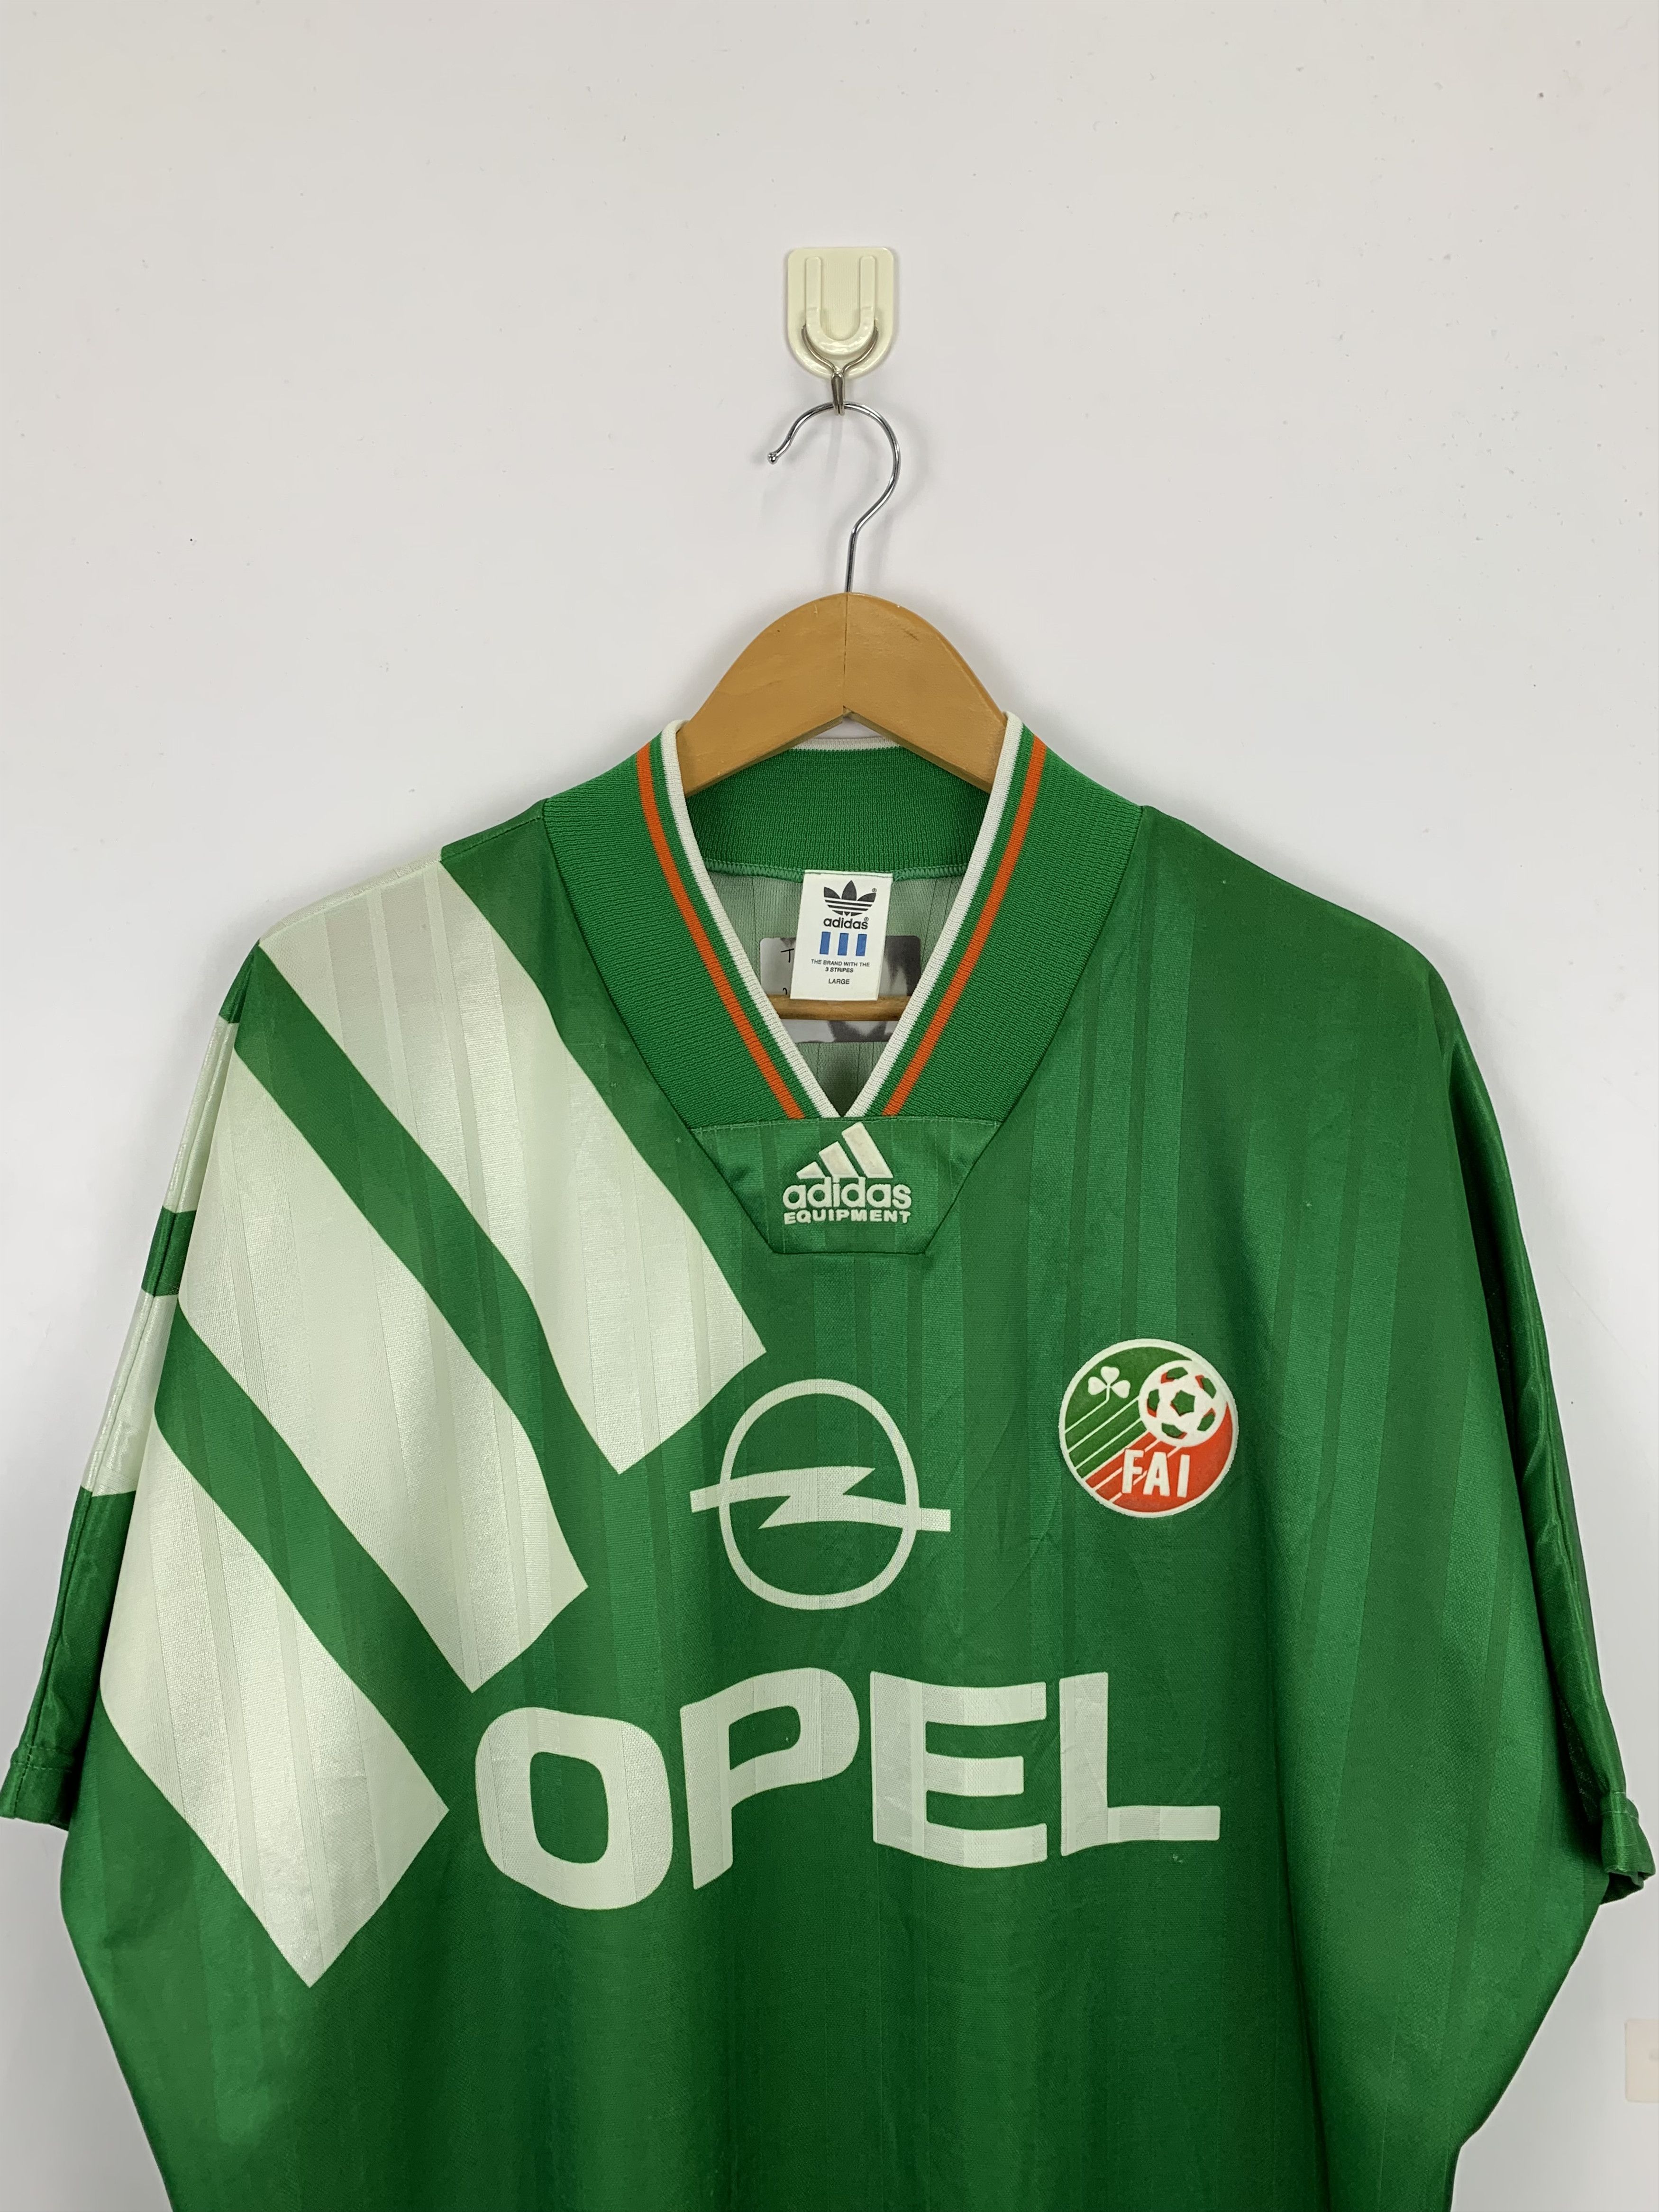 Adidas Vintage 90s Adidas Opel Ireland World Cup Jerseys Size US L / EU 52-54 / 3 - 2 Preview